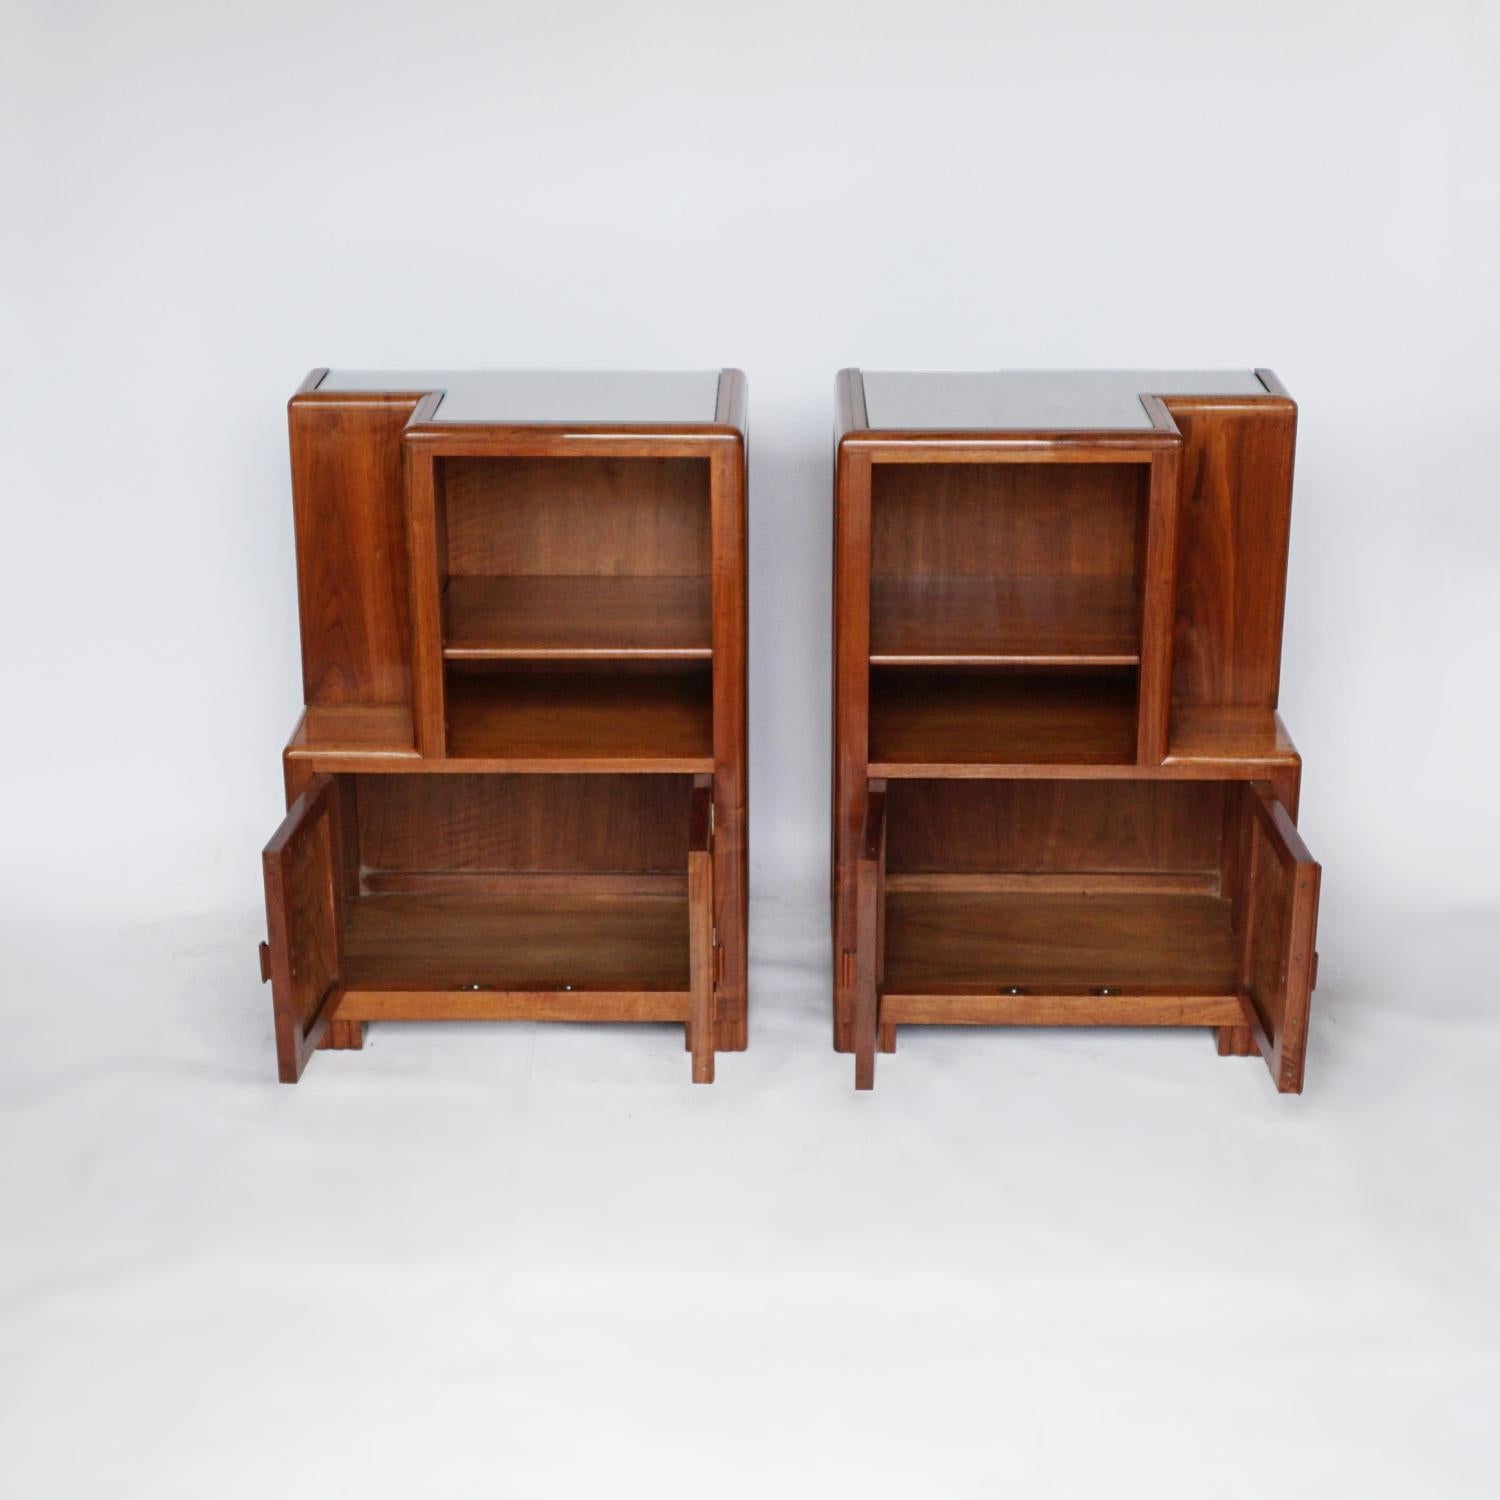 English Pair of Art Deco Bedside Cabinets by Betty Joel